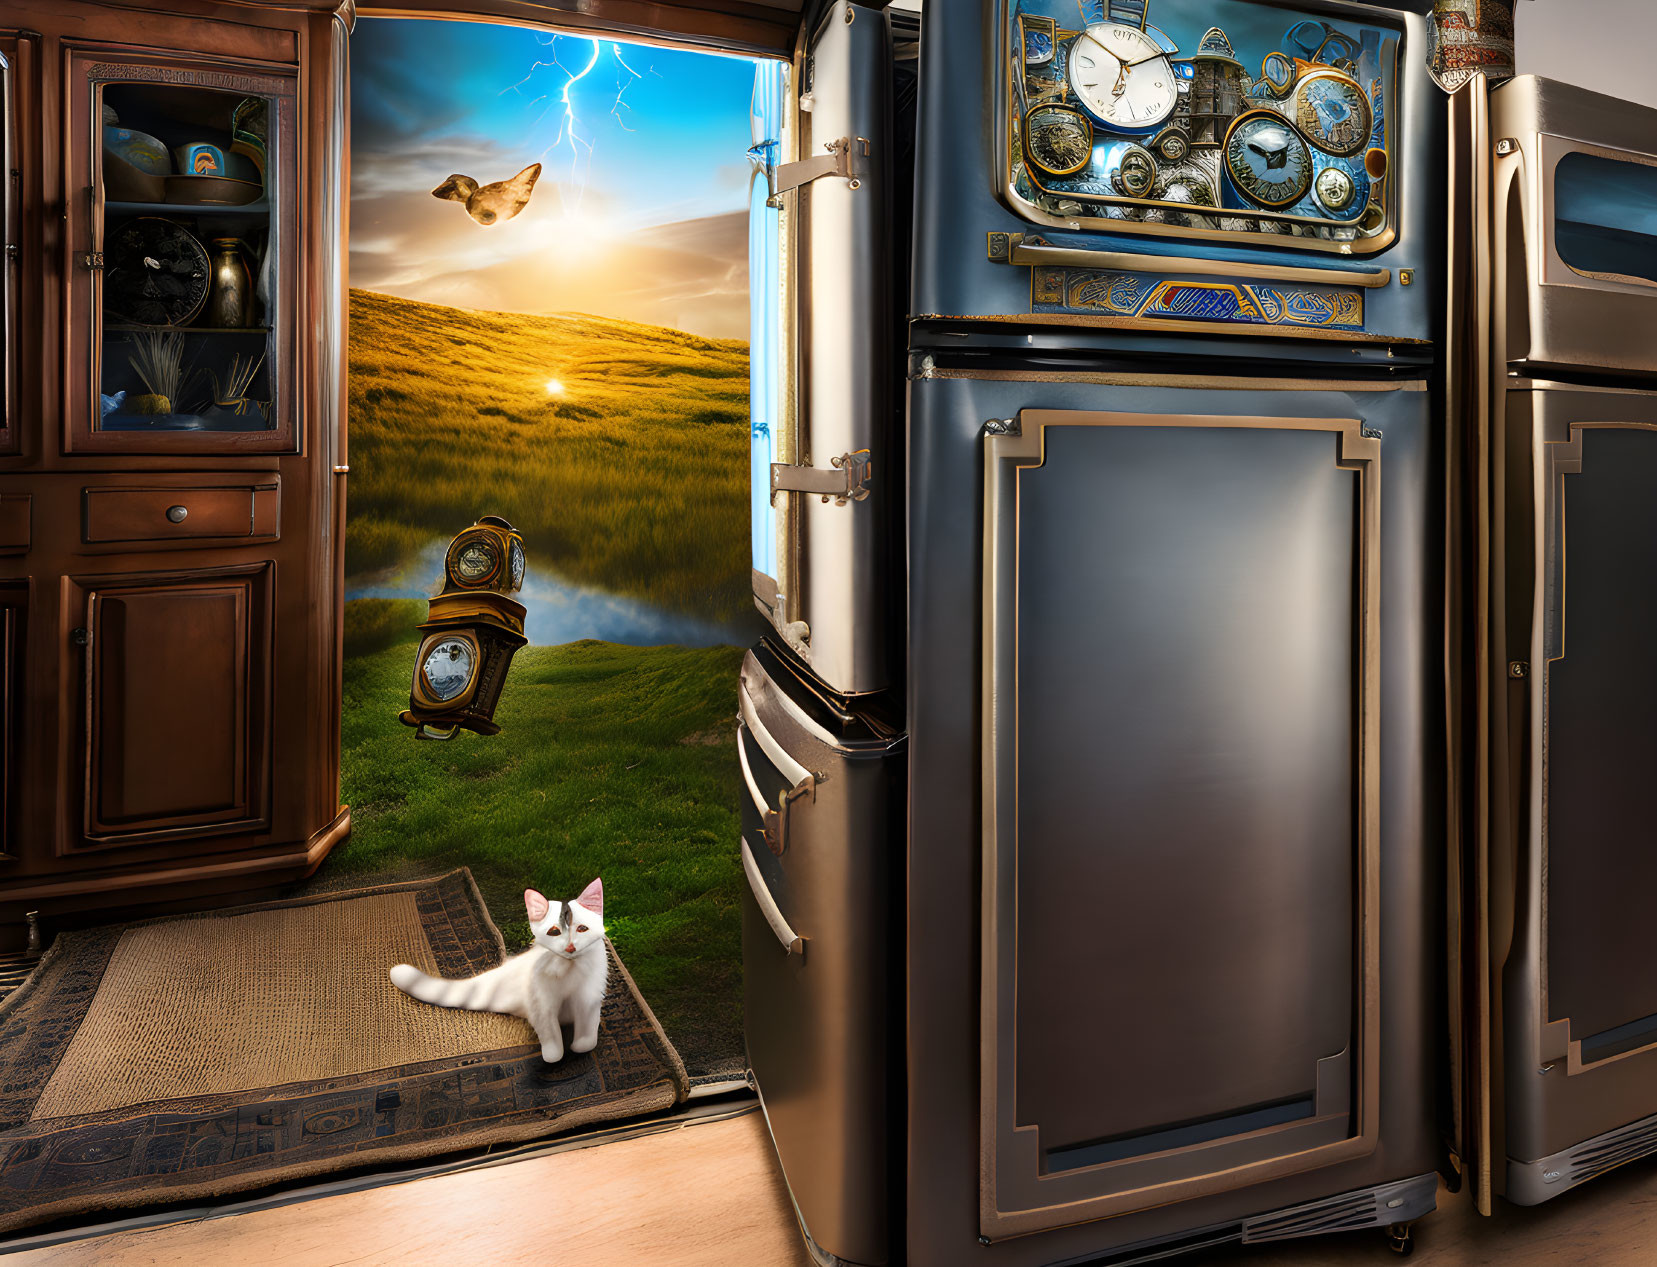 White Cat Curiously Observes Open Refrigerator Door in Surreal Scene